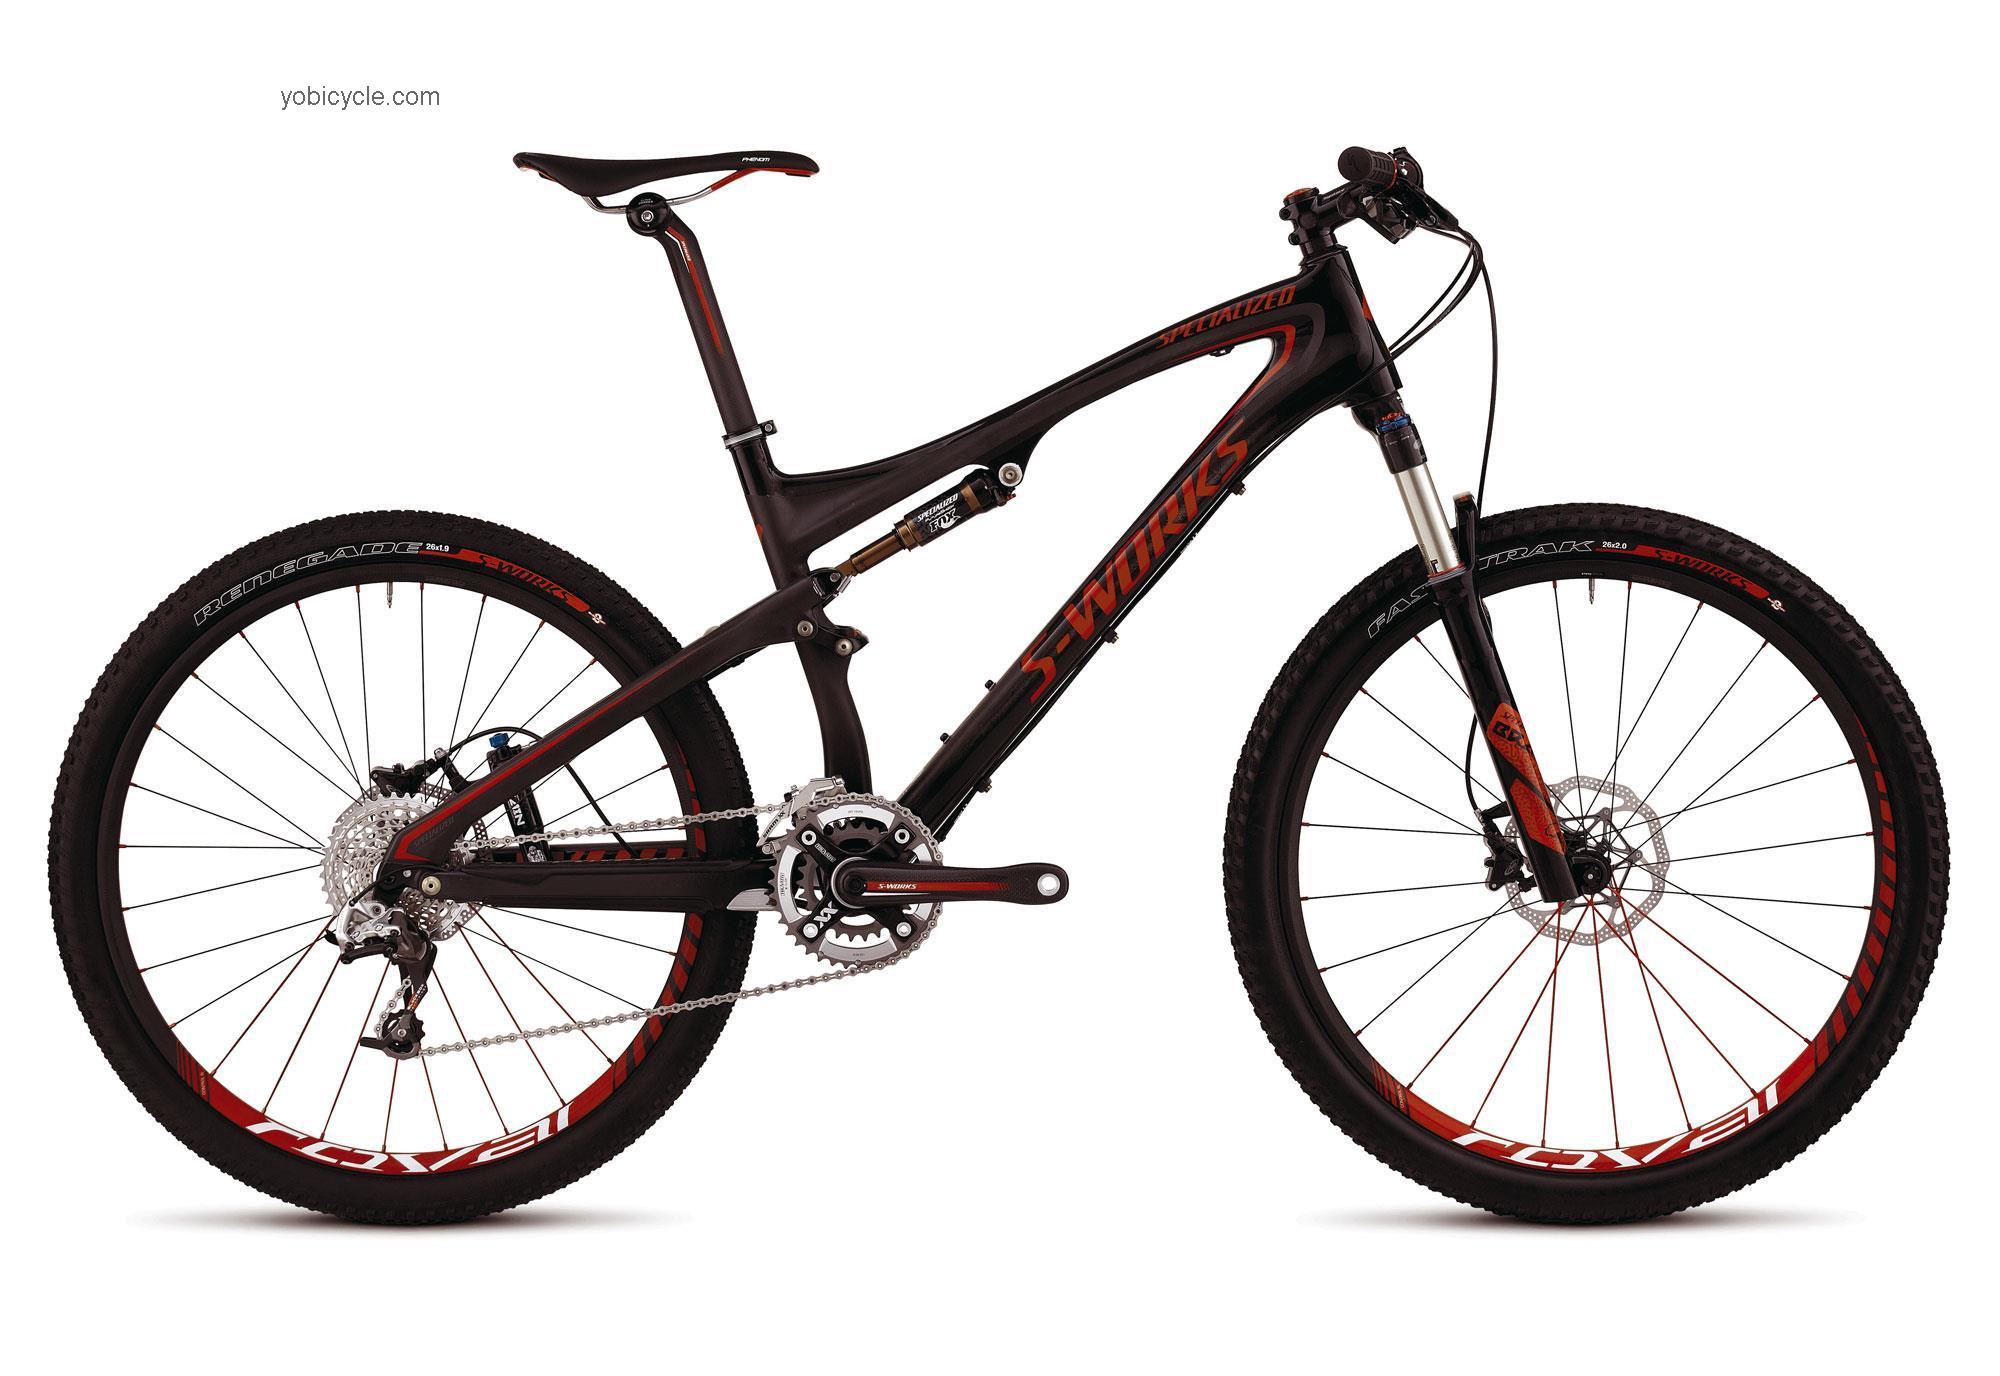 Specialized S-Works Epic FSR Carbon 2012 comparison online with competitors